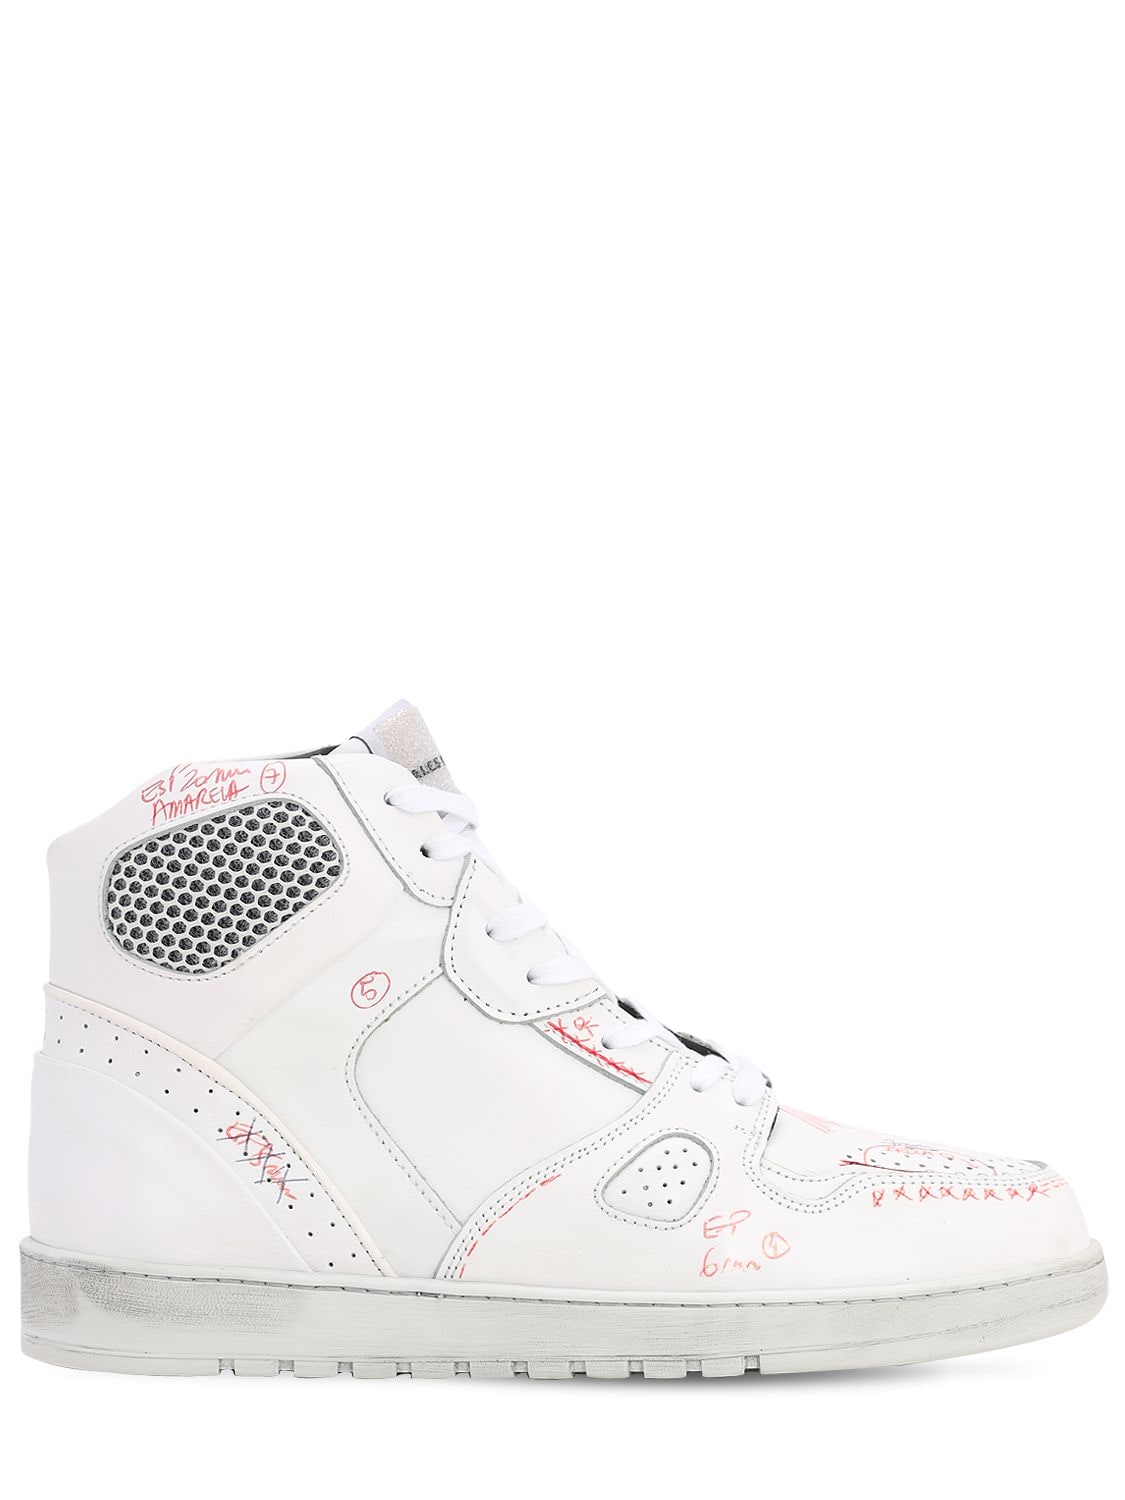 Ales Grey Battalion Printed Leather Sneakers In White